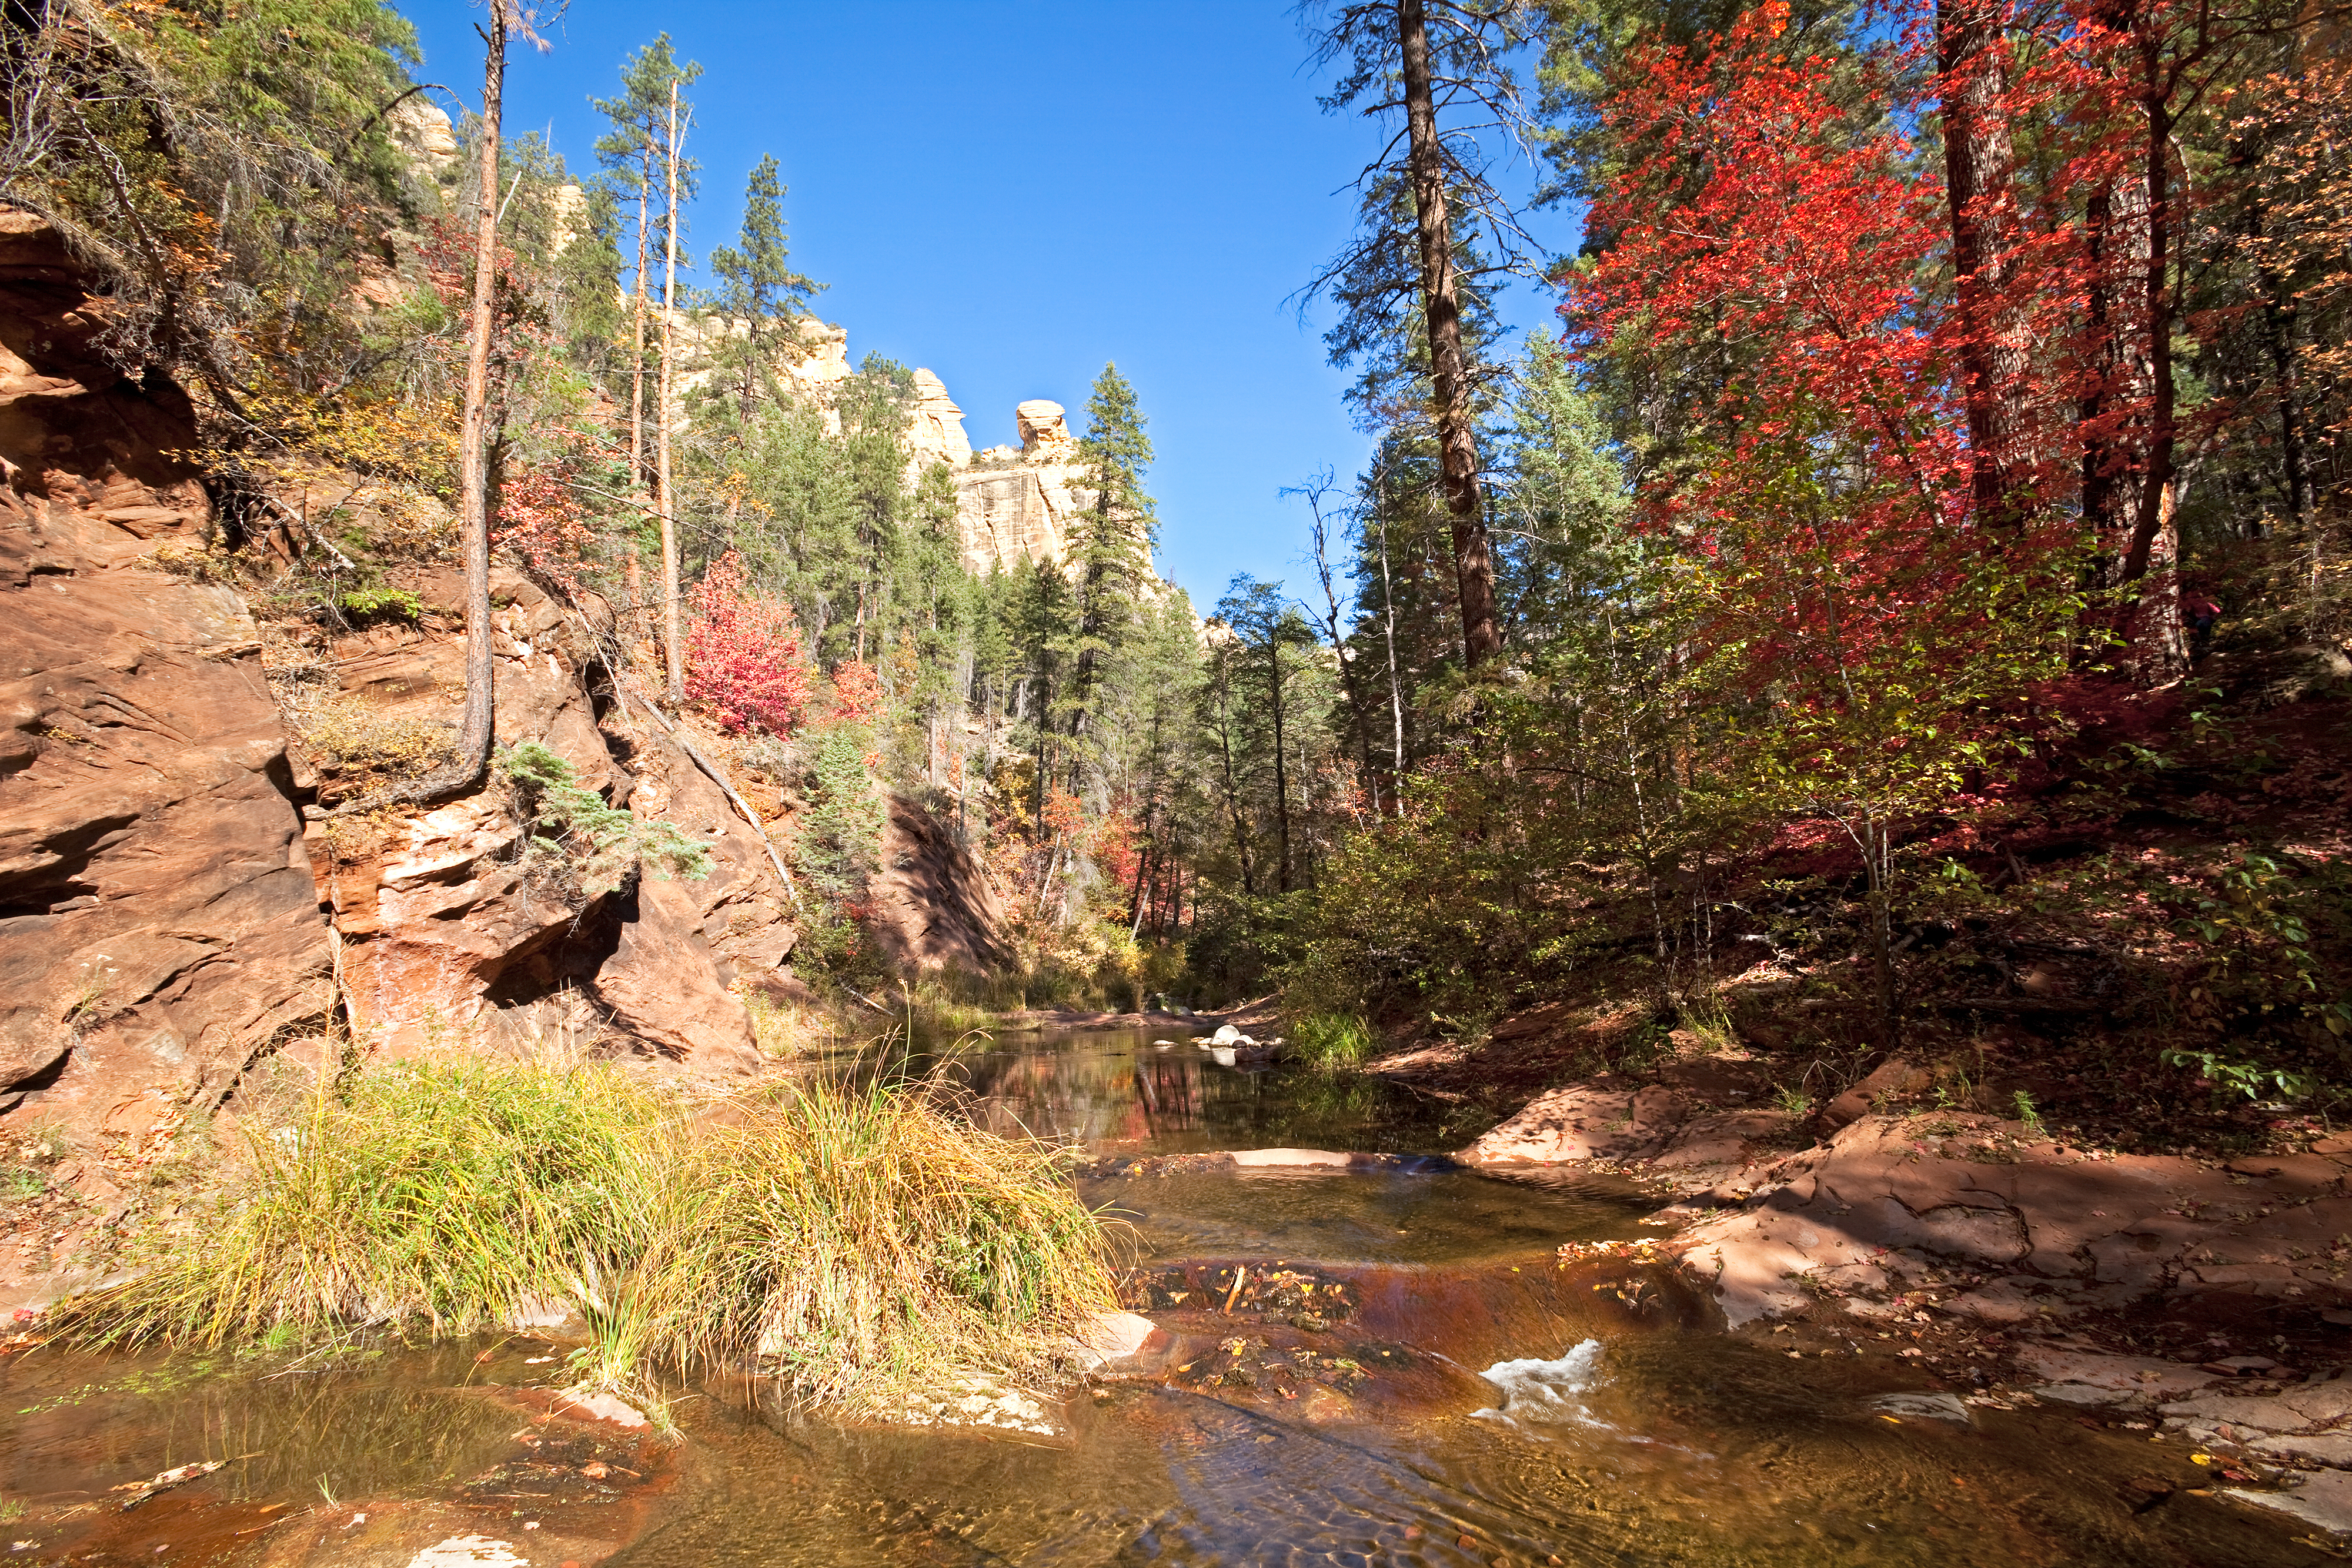 Travel Tuesday Spotlight: Coconino National Forest